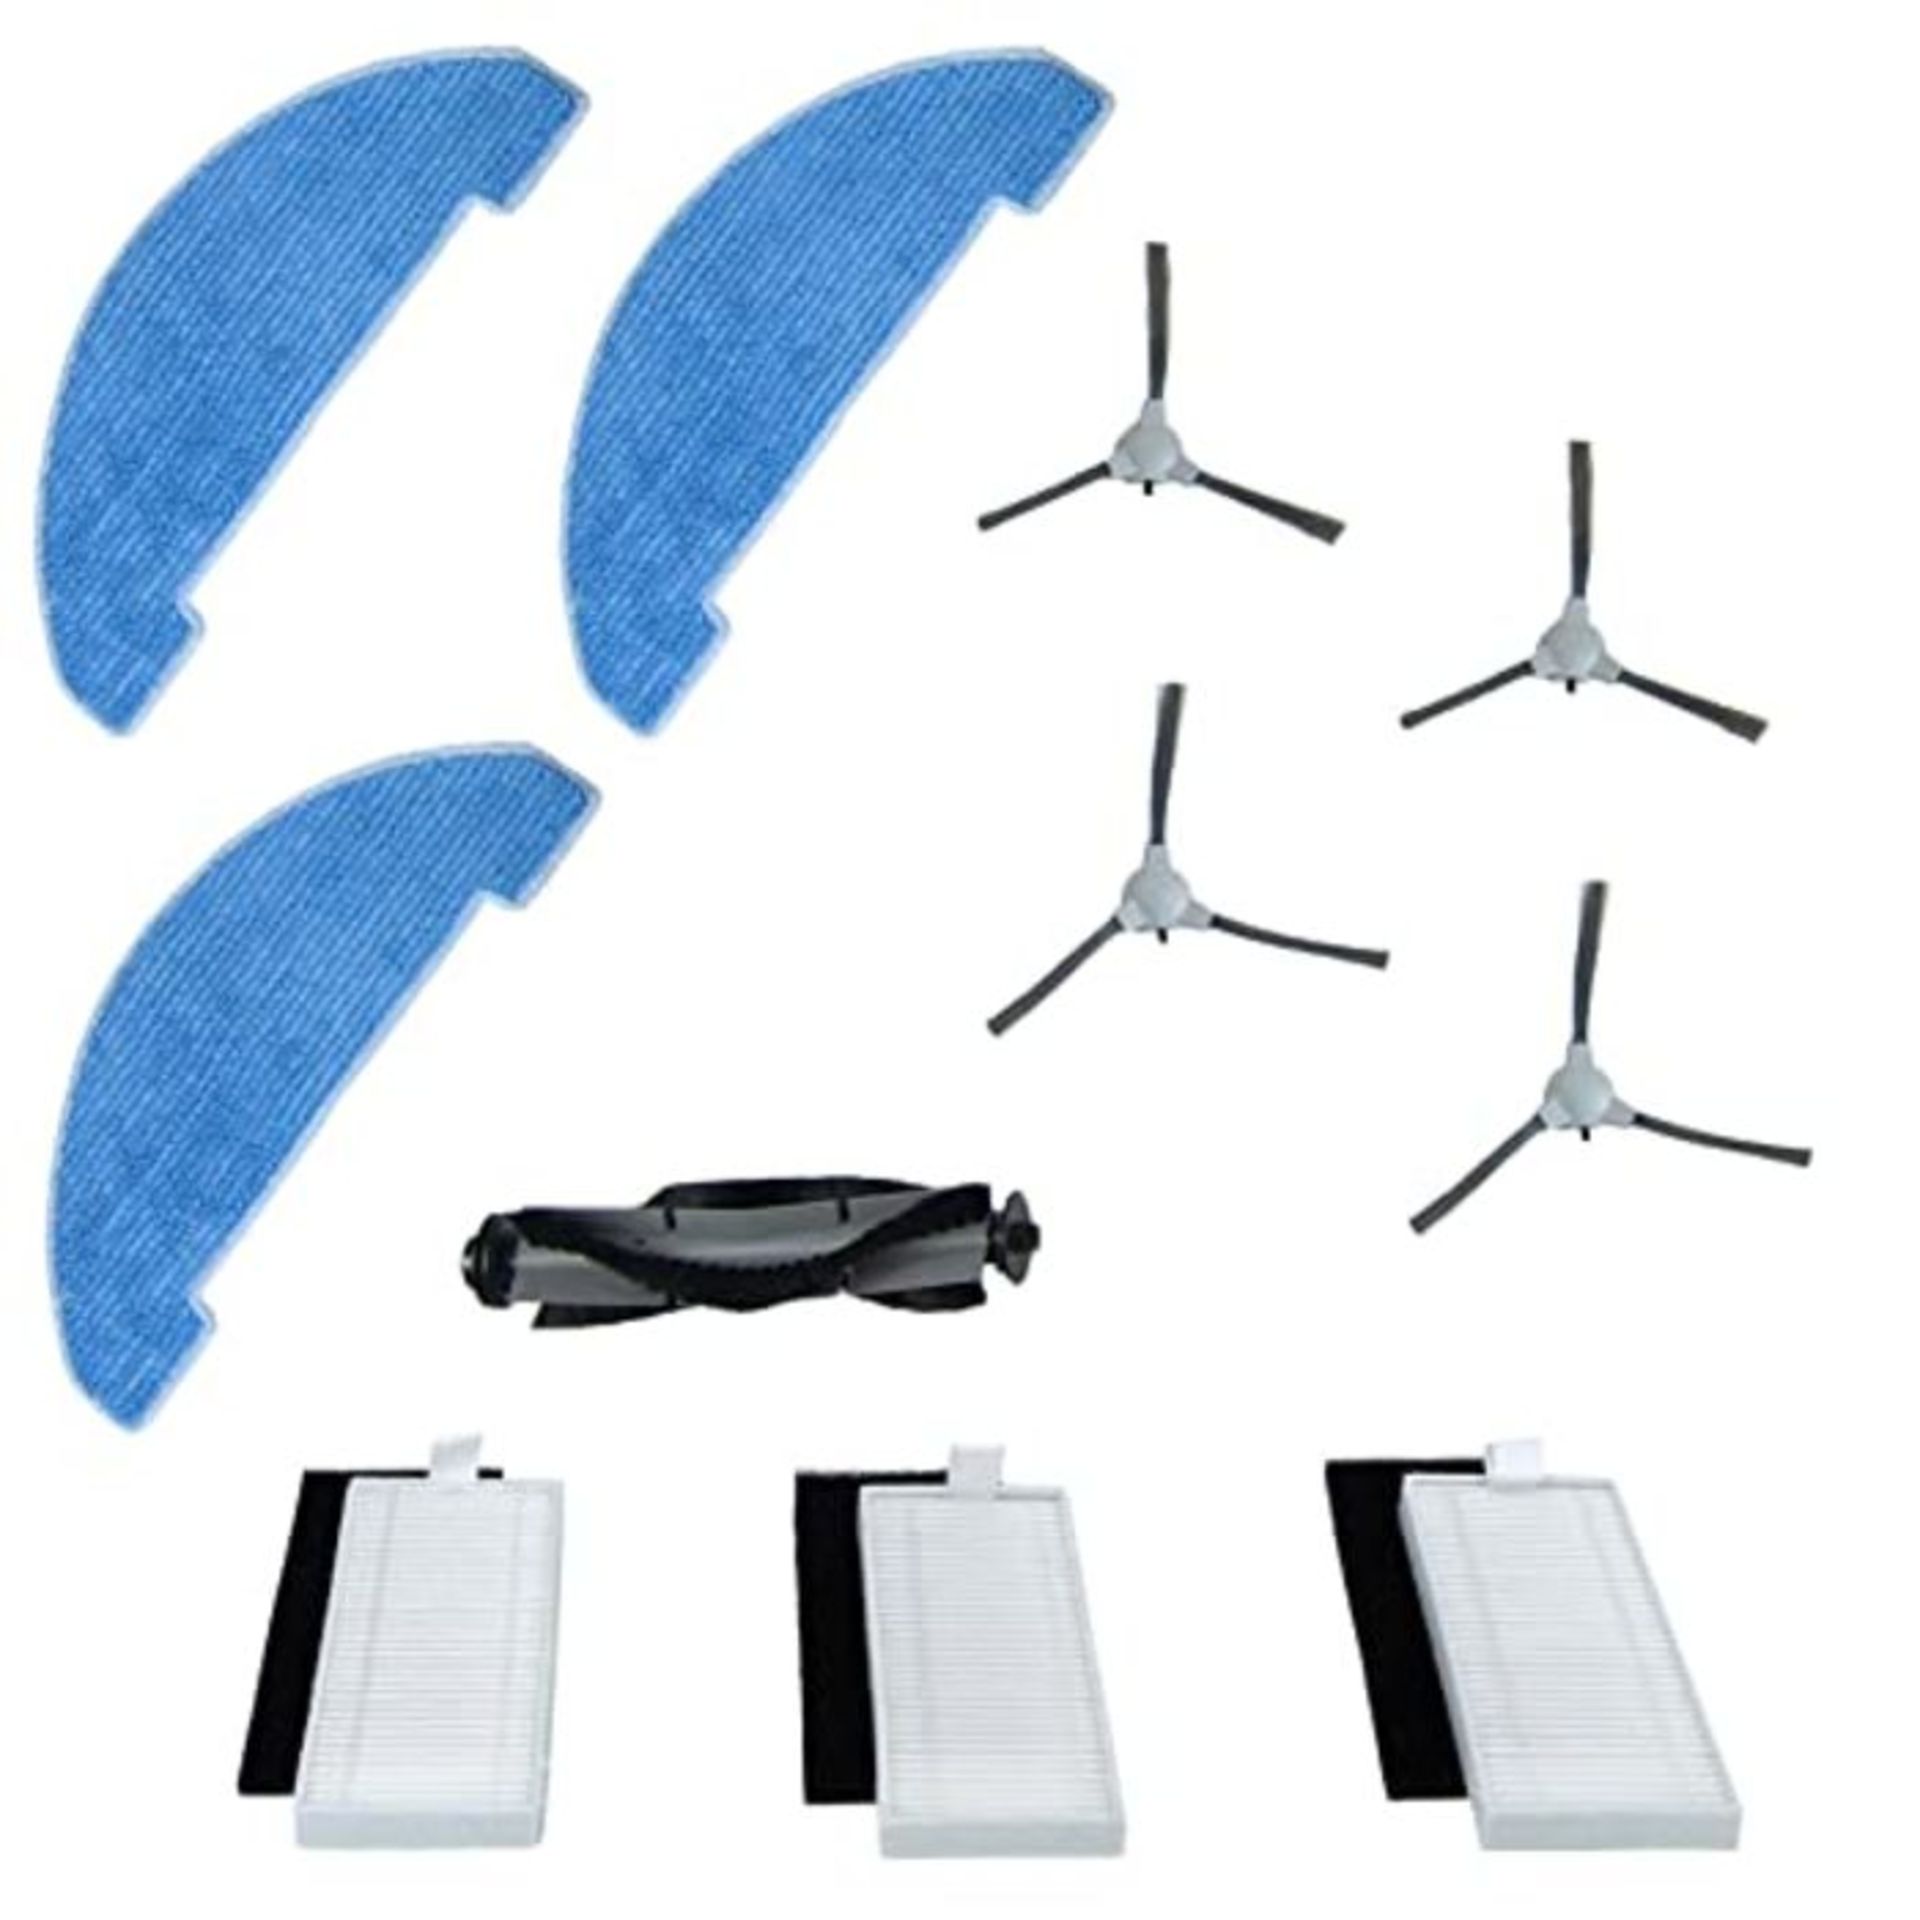 Venga! Spare Parts Kit for Robot Vacuum Cleaner VG RVC 3000, 4 Side Brushes, 1 Rolling